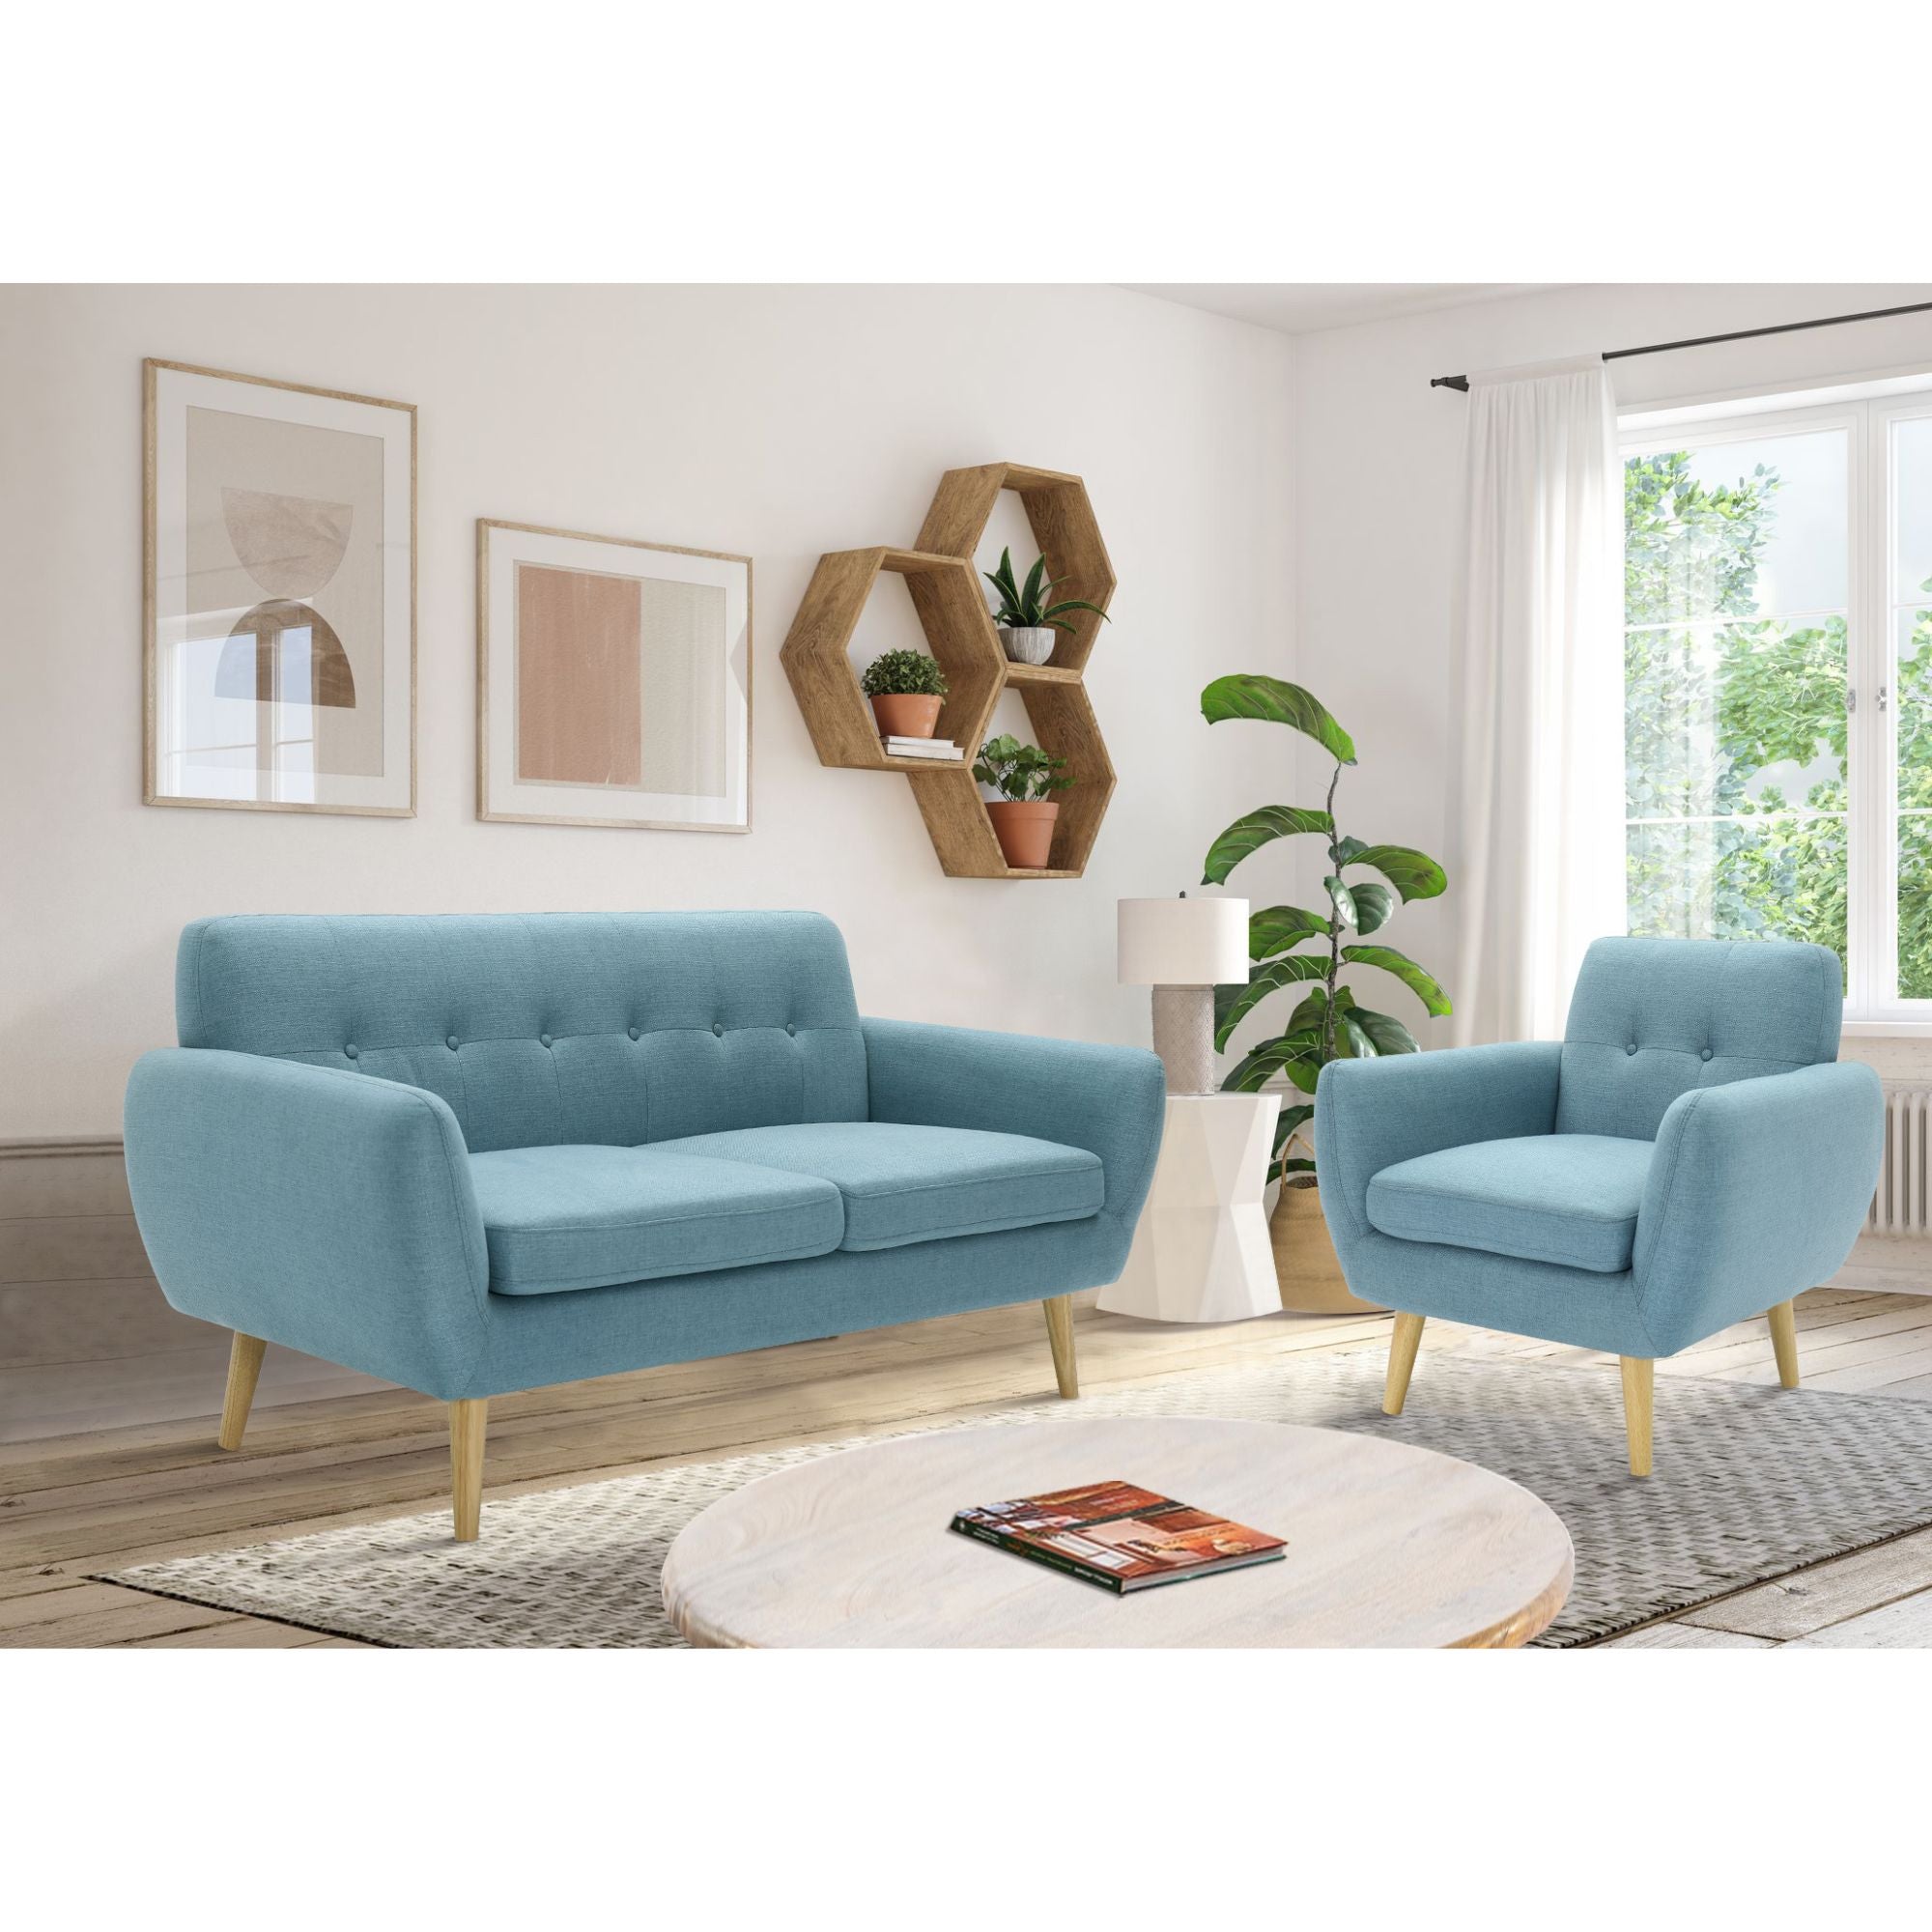 Dane 3 + 1 + 1 Seater Fabric Upholstered Sofa Armchair Lounge Couch - Blue